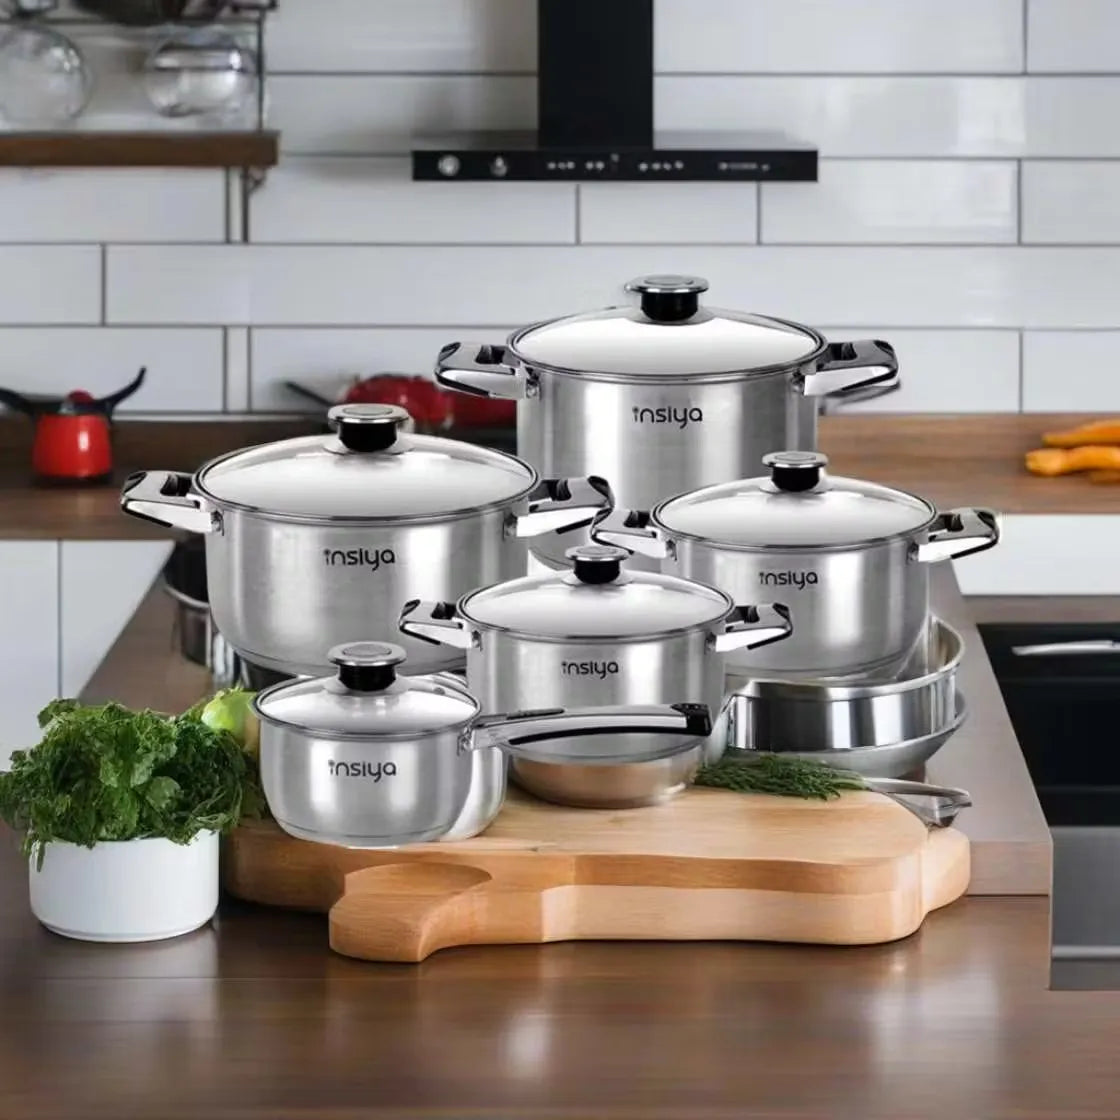 Insiya 10-piece stainless steel cookware set for confident cooking.  Master every meal with this versatile and stylish cookware set.  Durable and easy-to-clean pots and pans for everyday use. Includes: list items (pots, pans, lids, etc.)  High-quality stainless steel construction for even heat distribution. Highlight specific pieces in the set, like a large casserole dish.